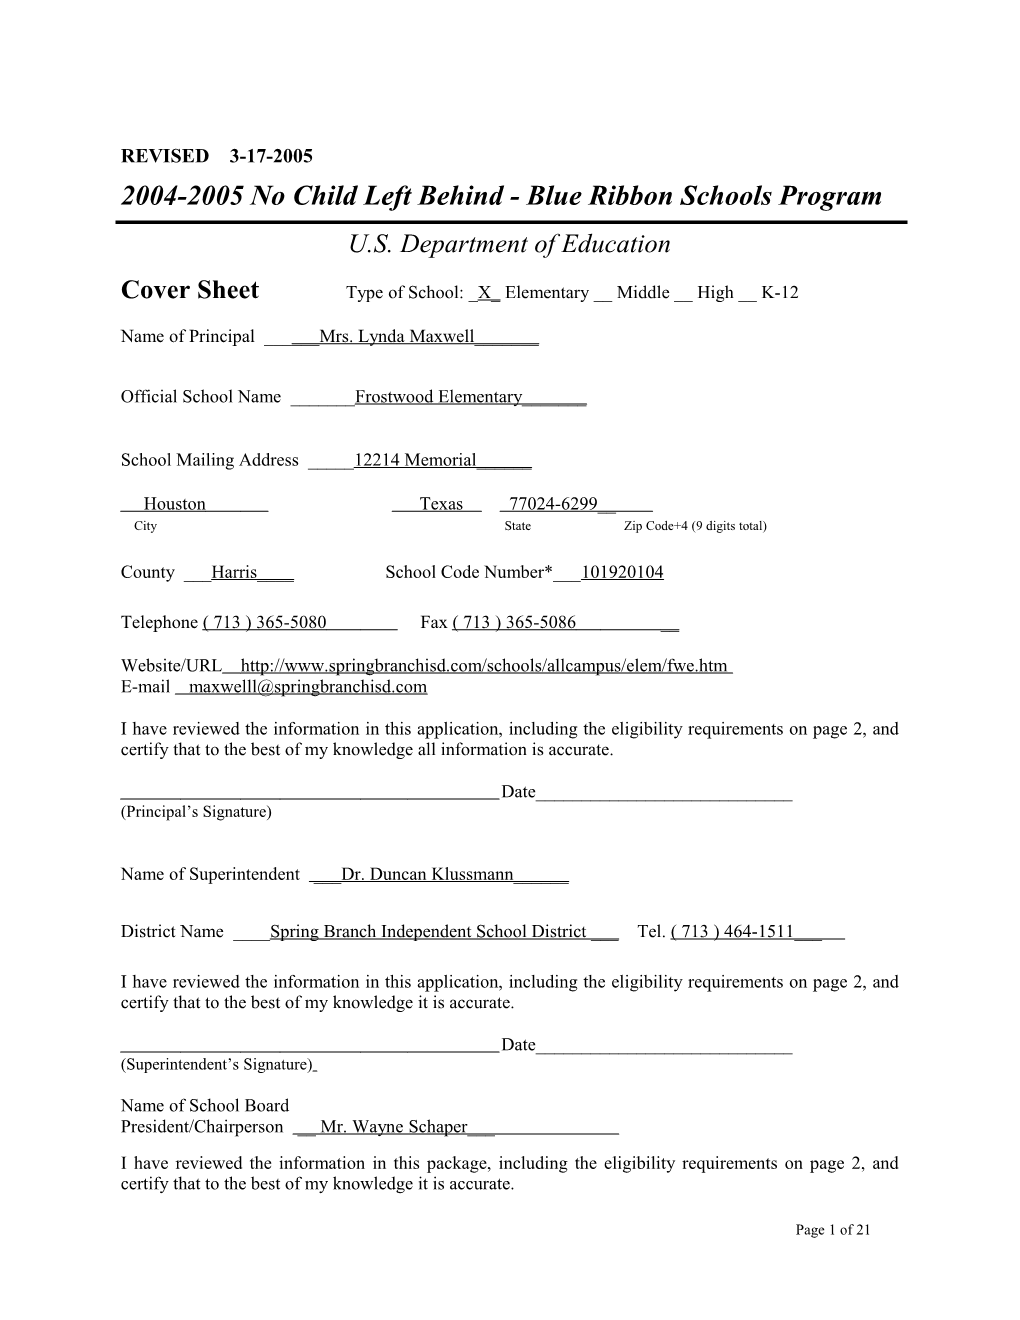 Frostwood Elementary School Application: 2004-2005, No Child Left Behind - Blue Ribbon